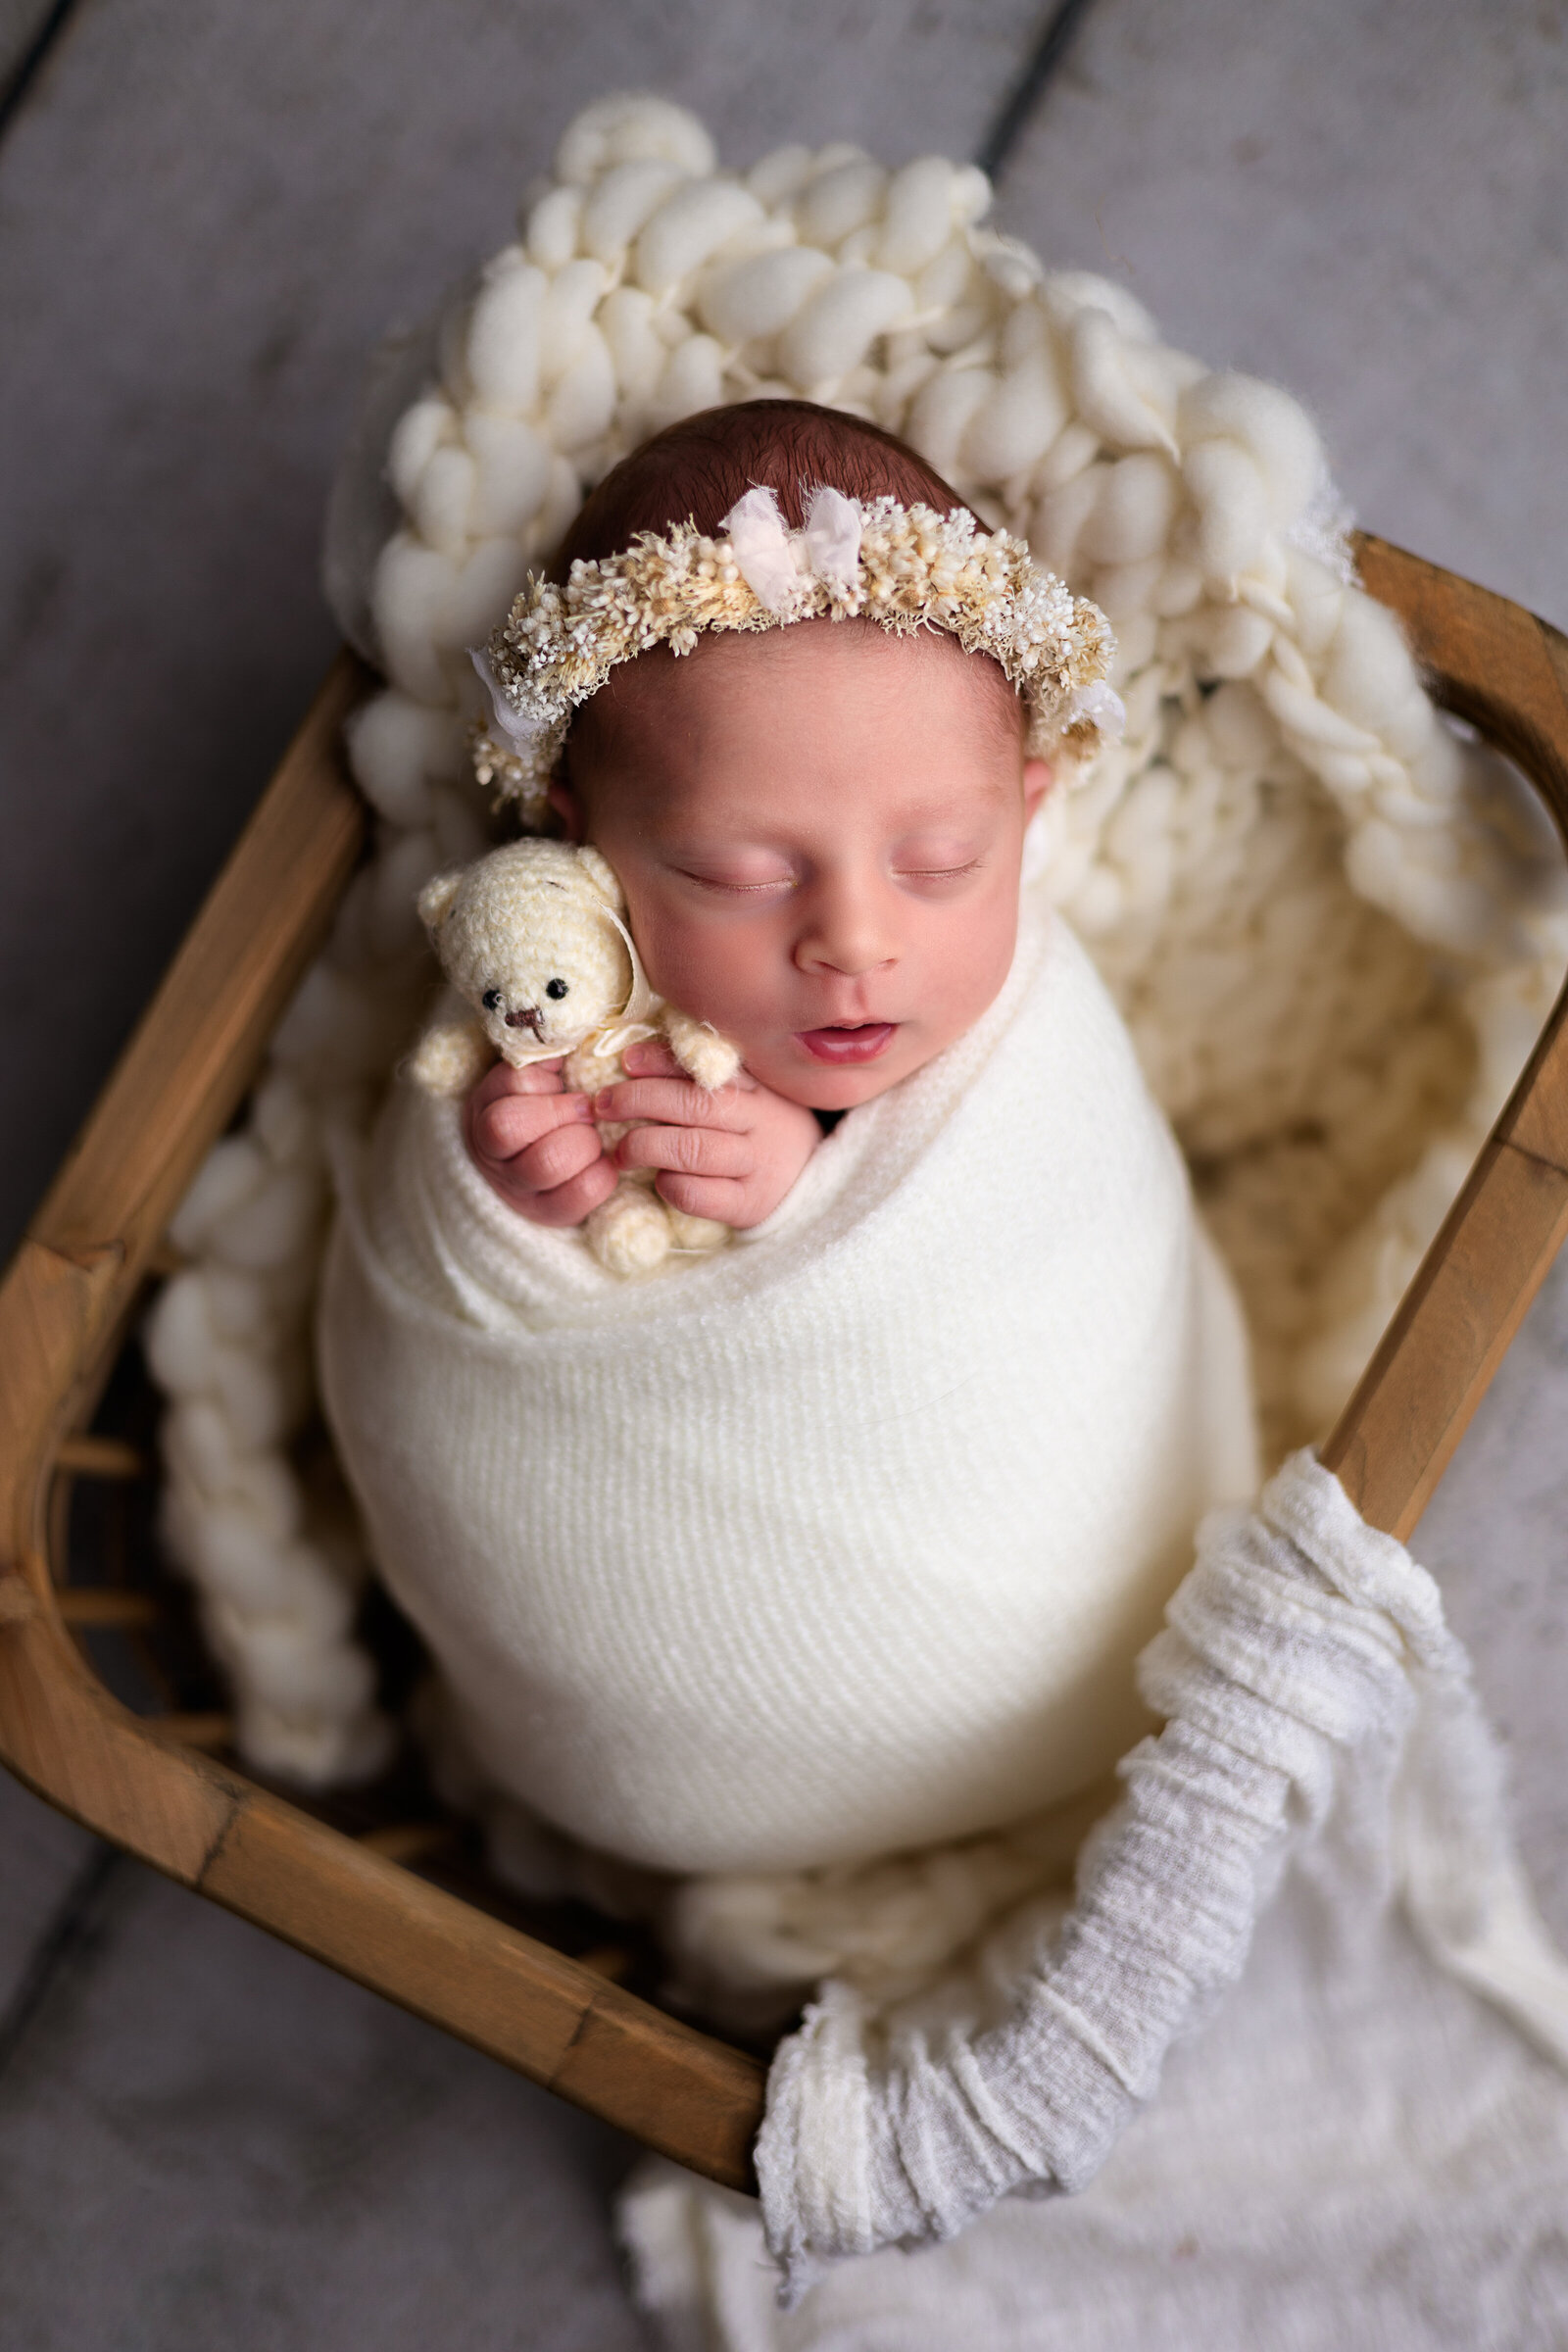 Newborn girl swaddled in a cream wrap snuggled up with a white teddy bear in a brown crate